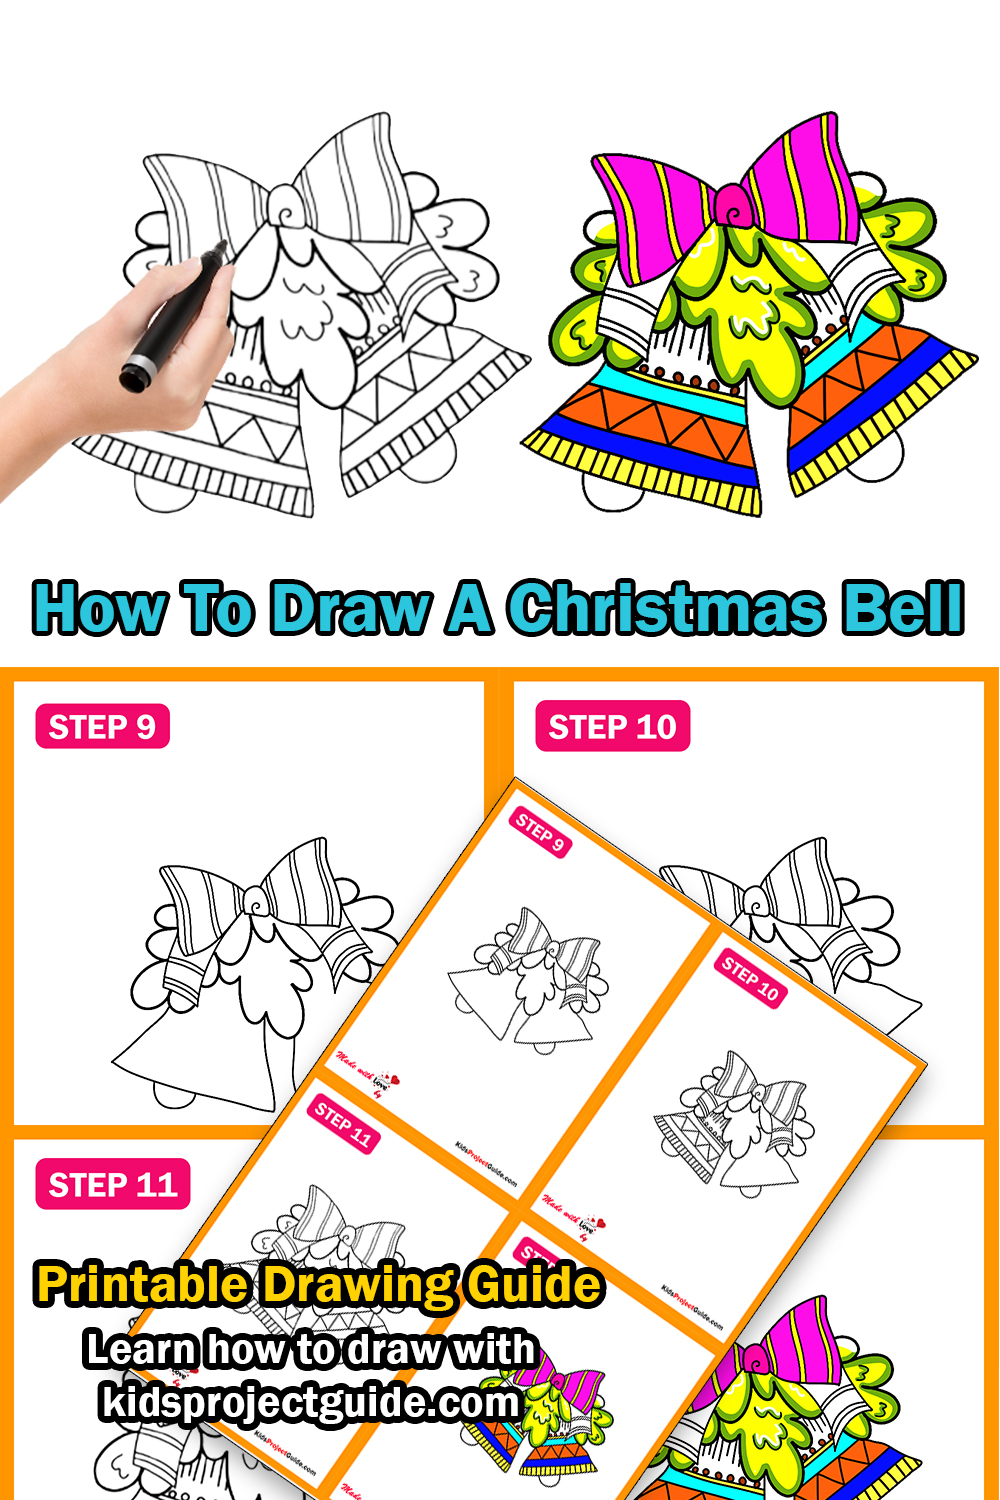 How To Draw Christmas Bells, Step by Step, Drawing Guide, by Dawn - DragoArt